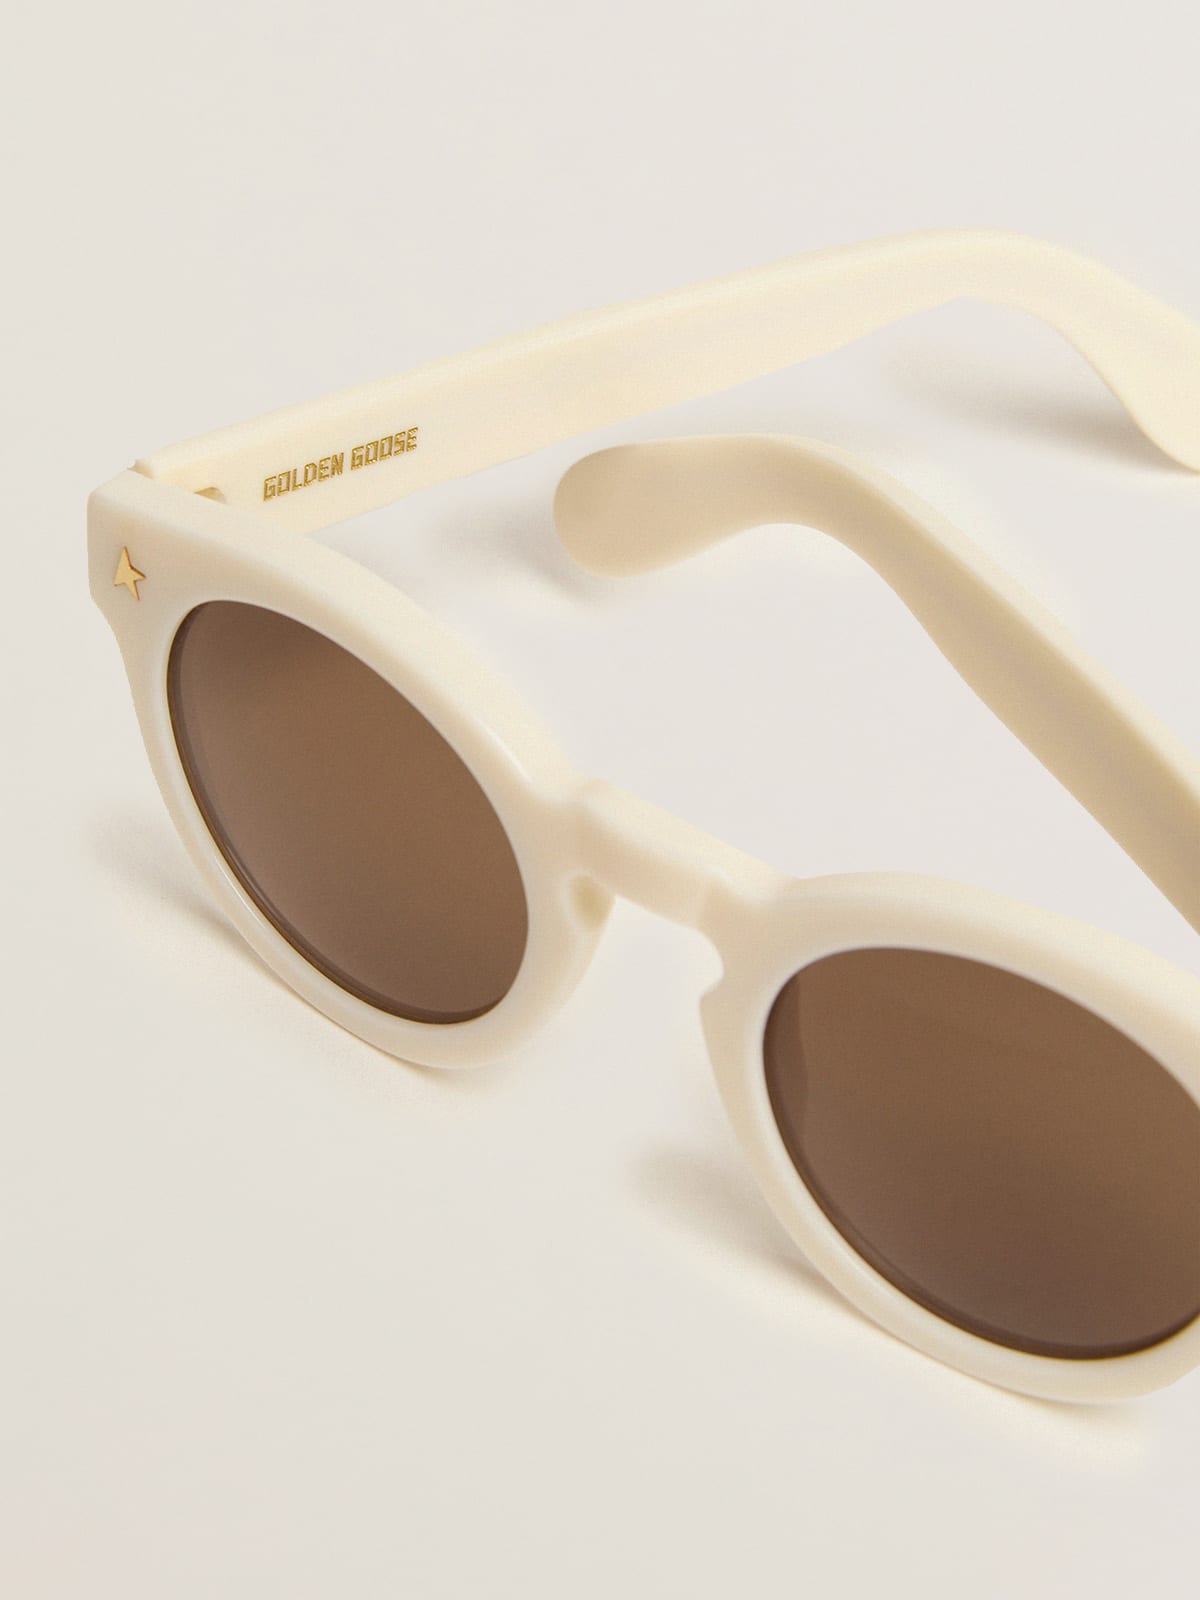 Golden Goose - Sunglasses Panthos model with white frame and gold details in 